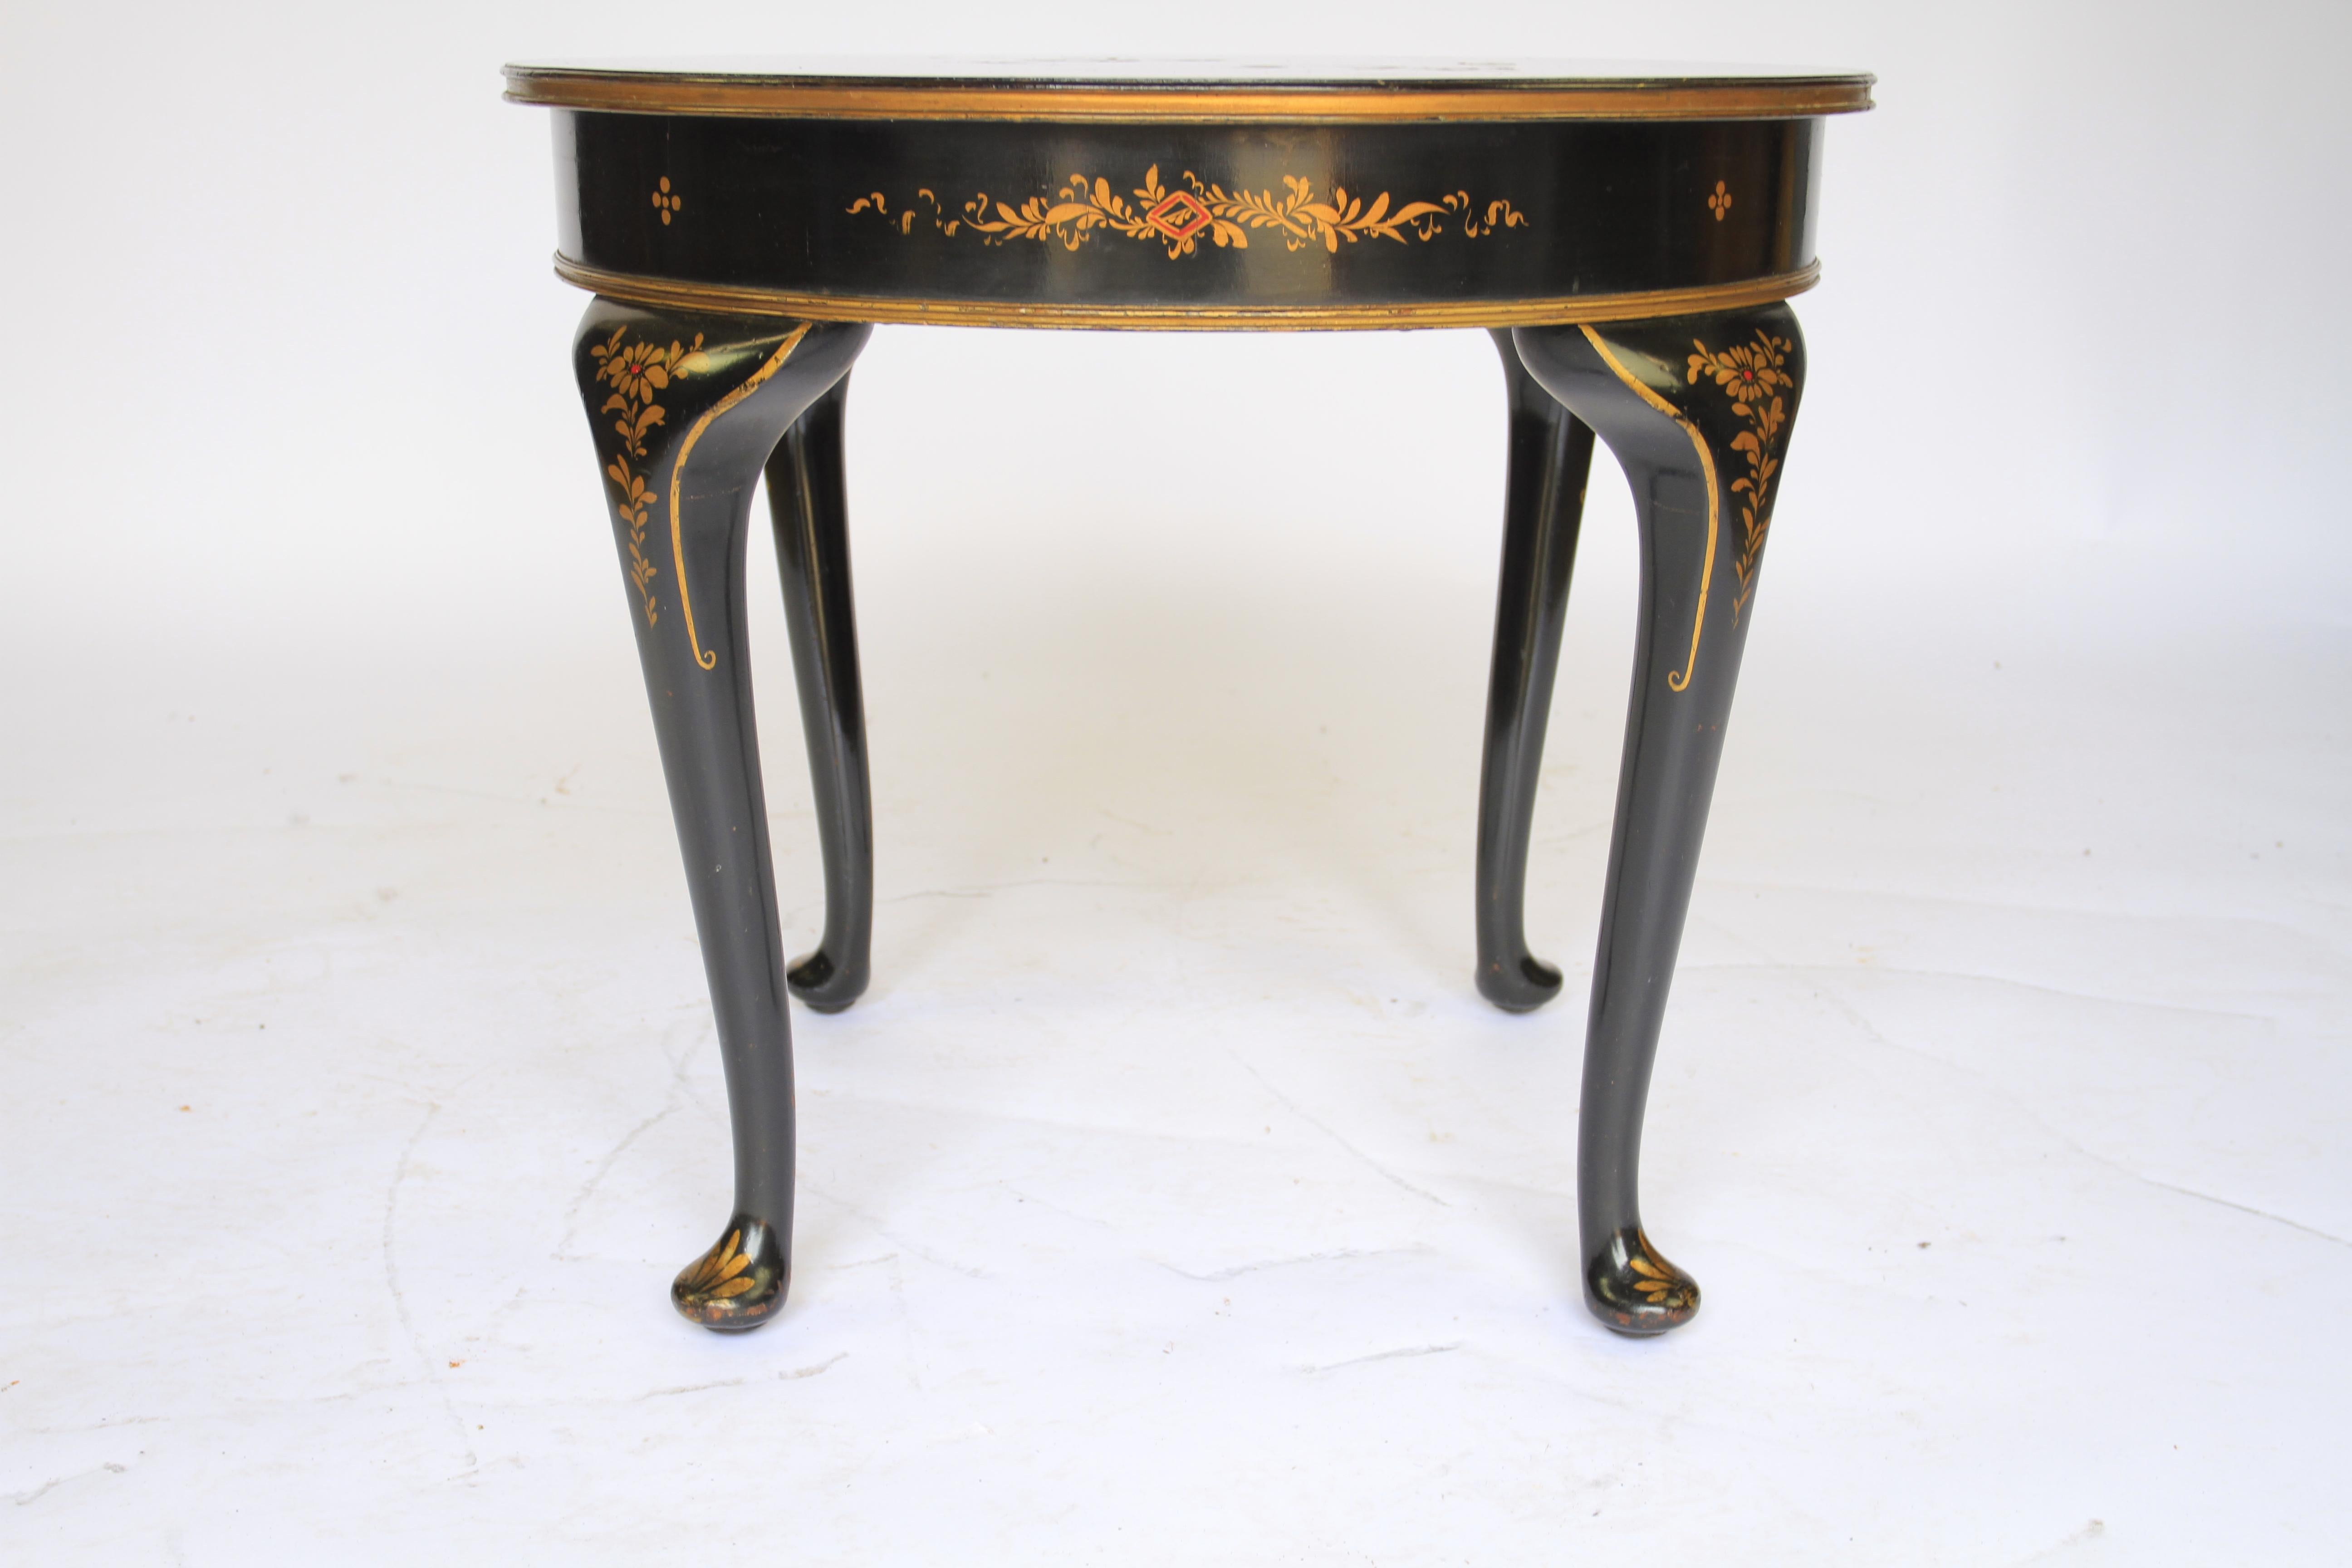 Chinoiserie decorated coffee table circa 1930s
Black background, 
gilt  Chinoiserie decoration
Depicting Figures & landscape scene
Gilt decoration around frieze & legs
Very good original condition